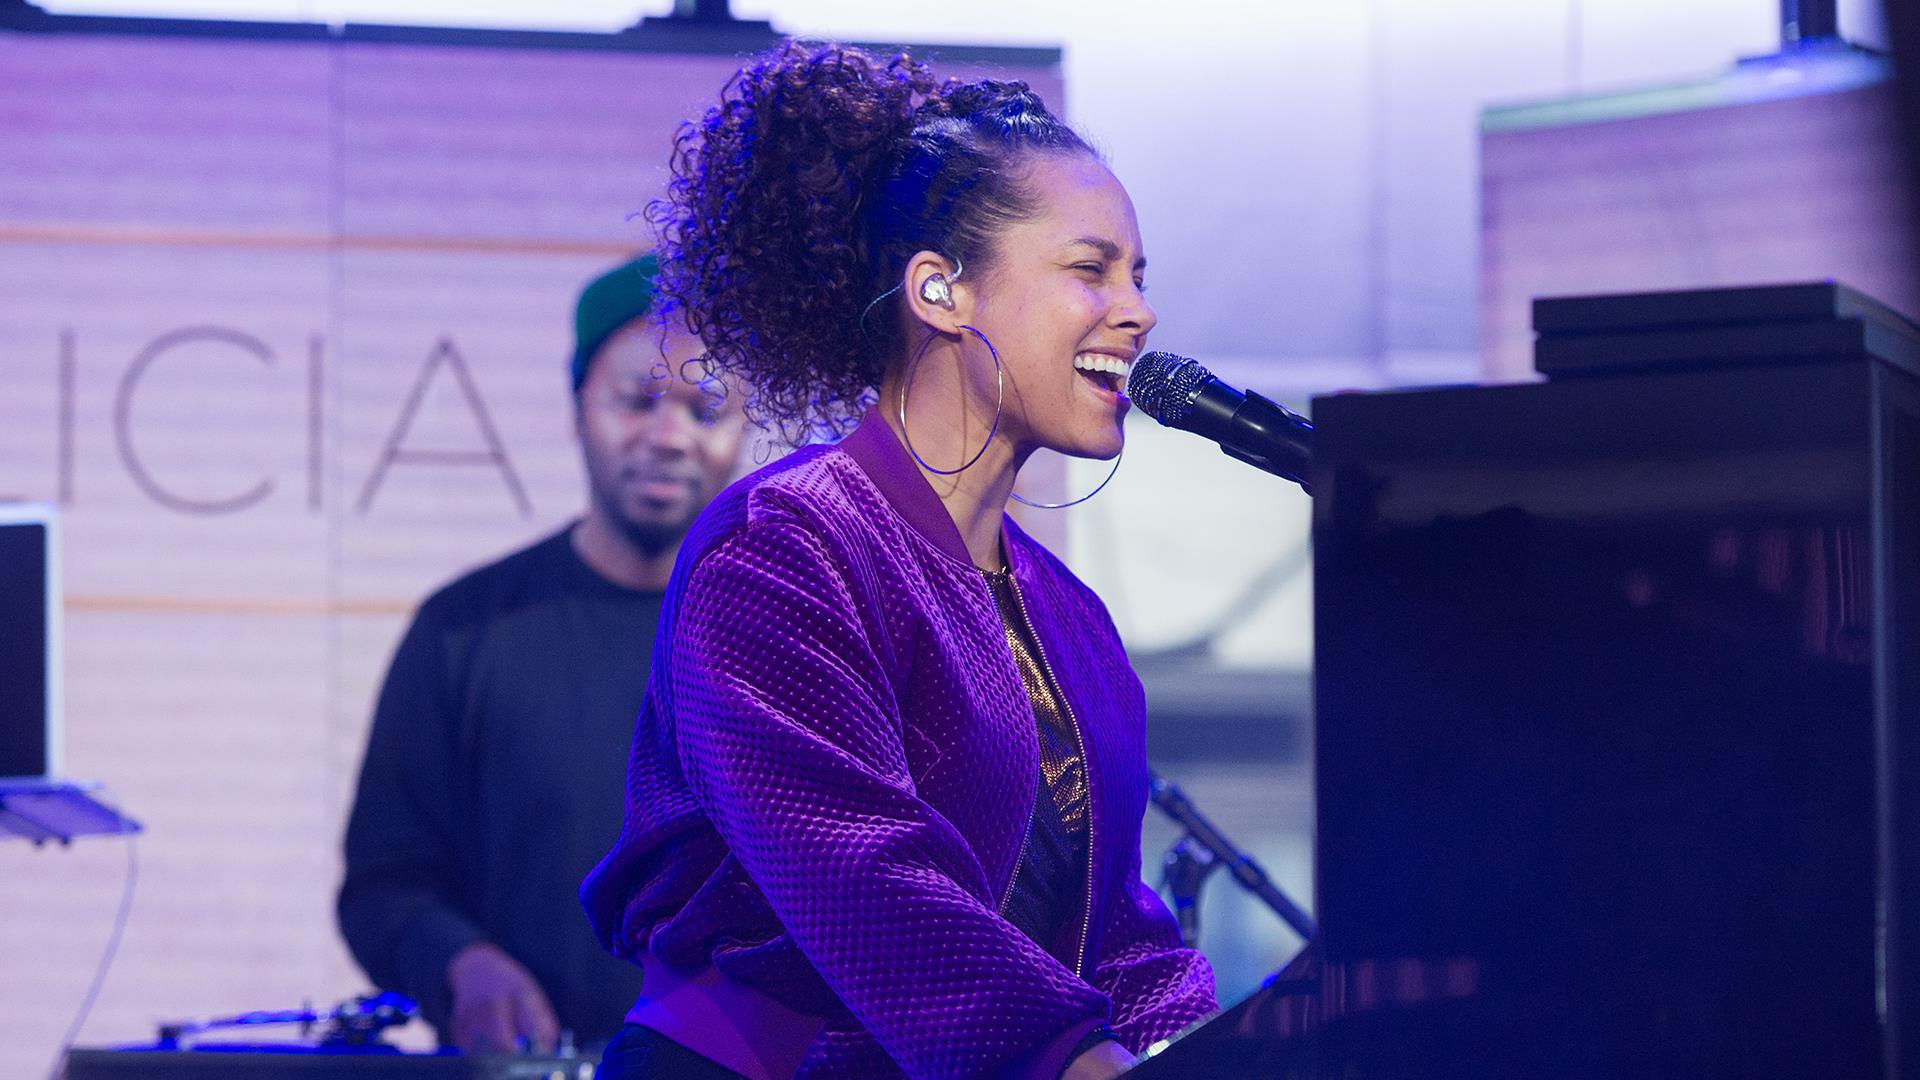 Watch Alicia Keys perform 'Work on It' from new album 'Here' live on TODAY